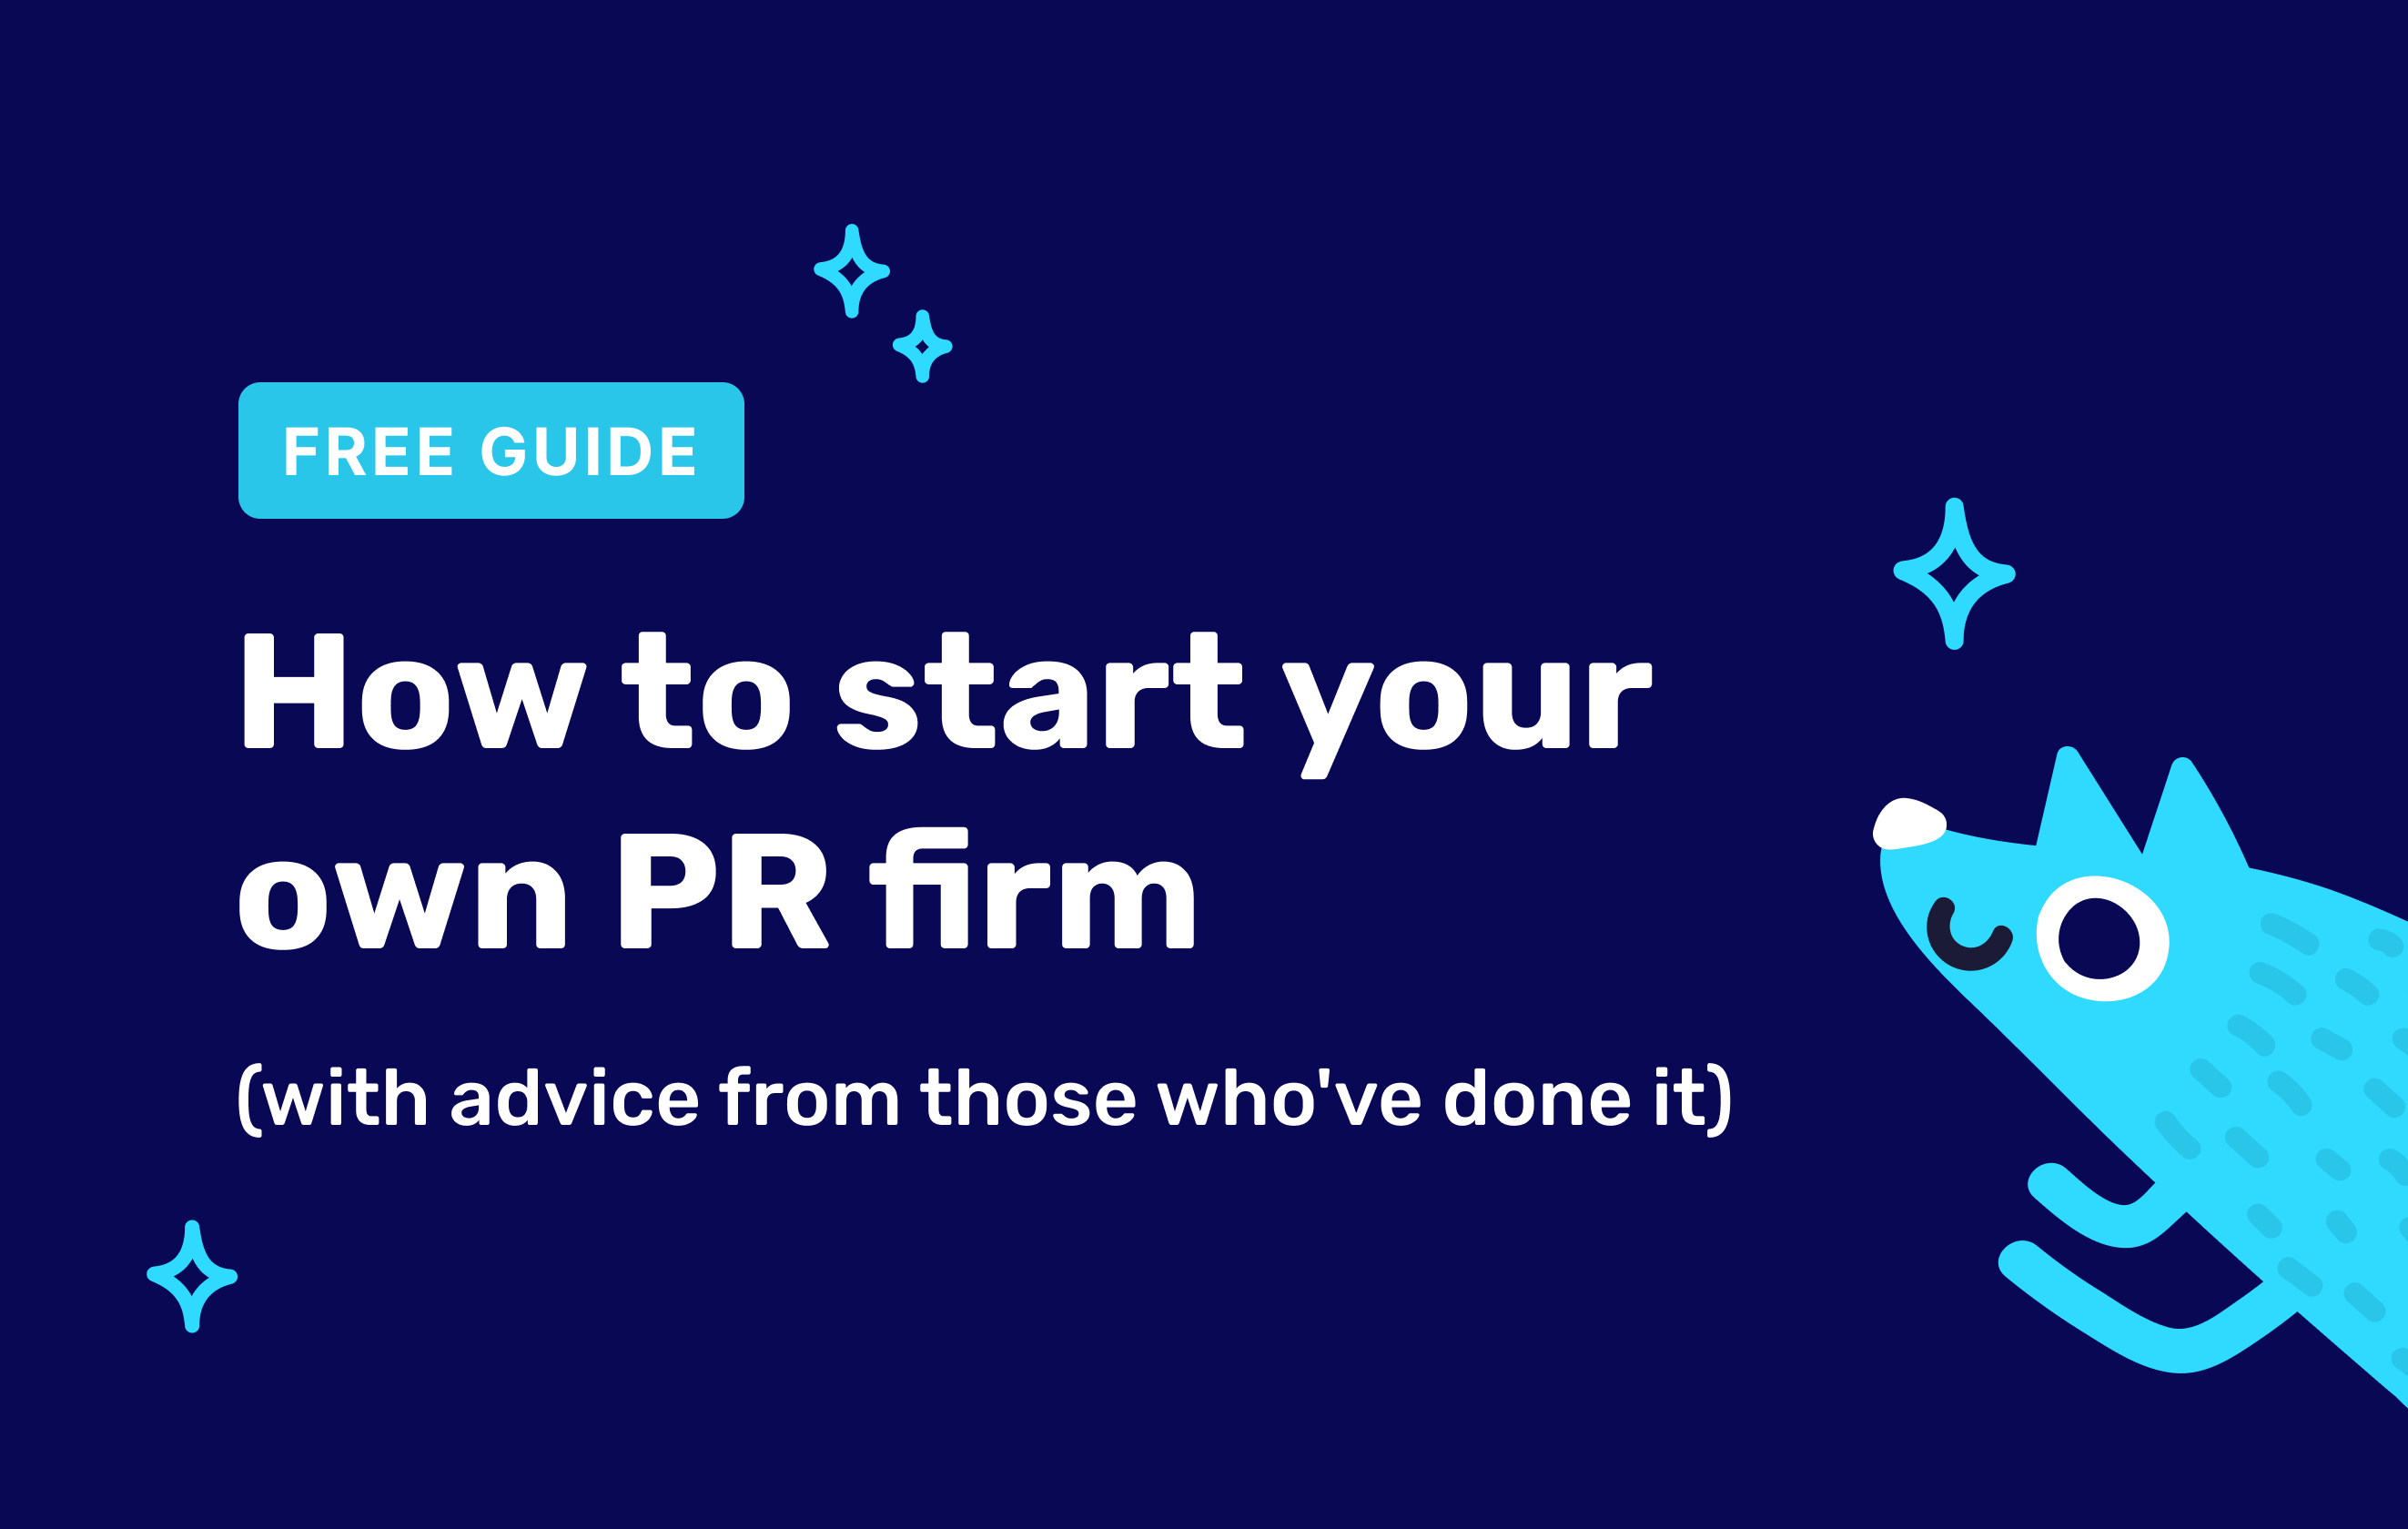 How to start your own PR firm (with advice from those who've done it)